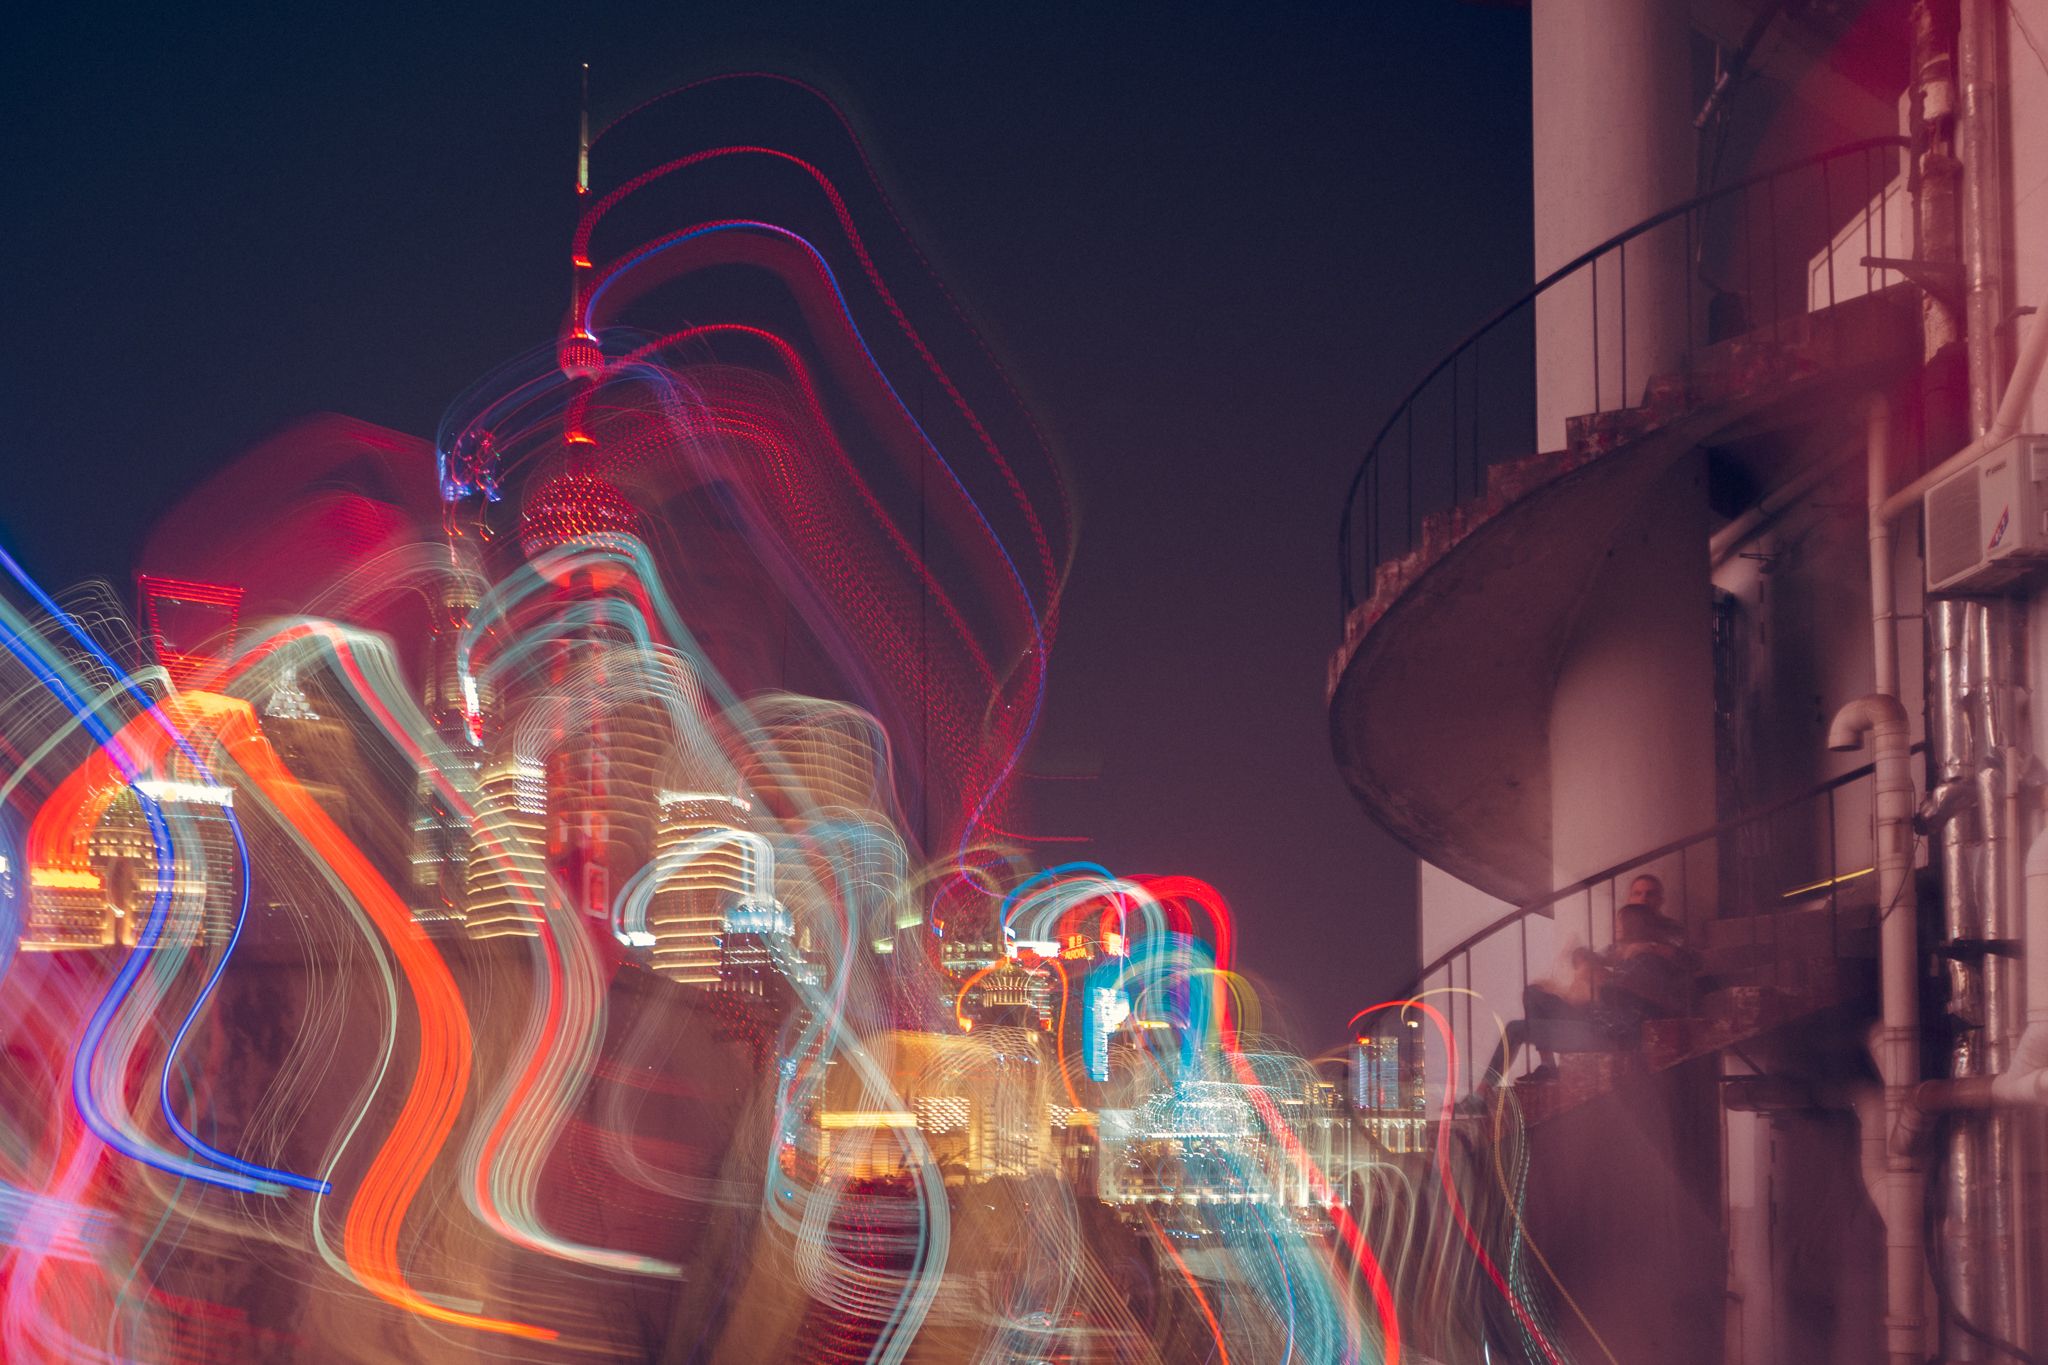 city lights, vibrant buildings, light trails, colorful palette, spiral staircase, hotel emergency exit, light show, metropolis skyline, urban night scene, couple watching lights, cityscape photography, night skyline view, urban trails of light, colorful u, Druz Denys